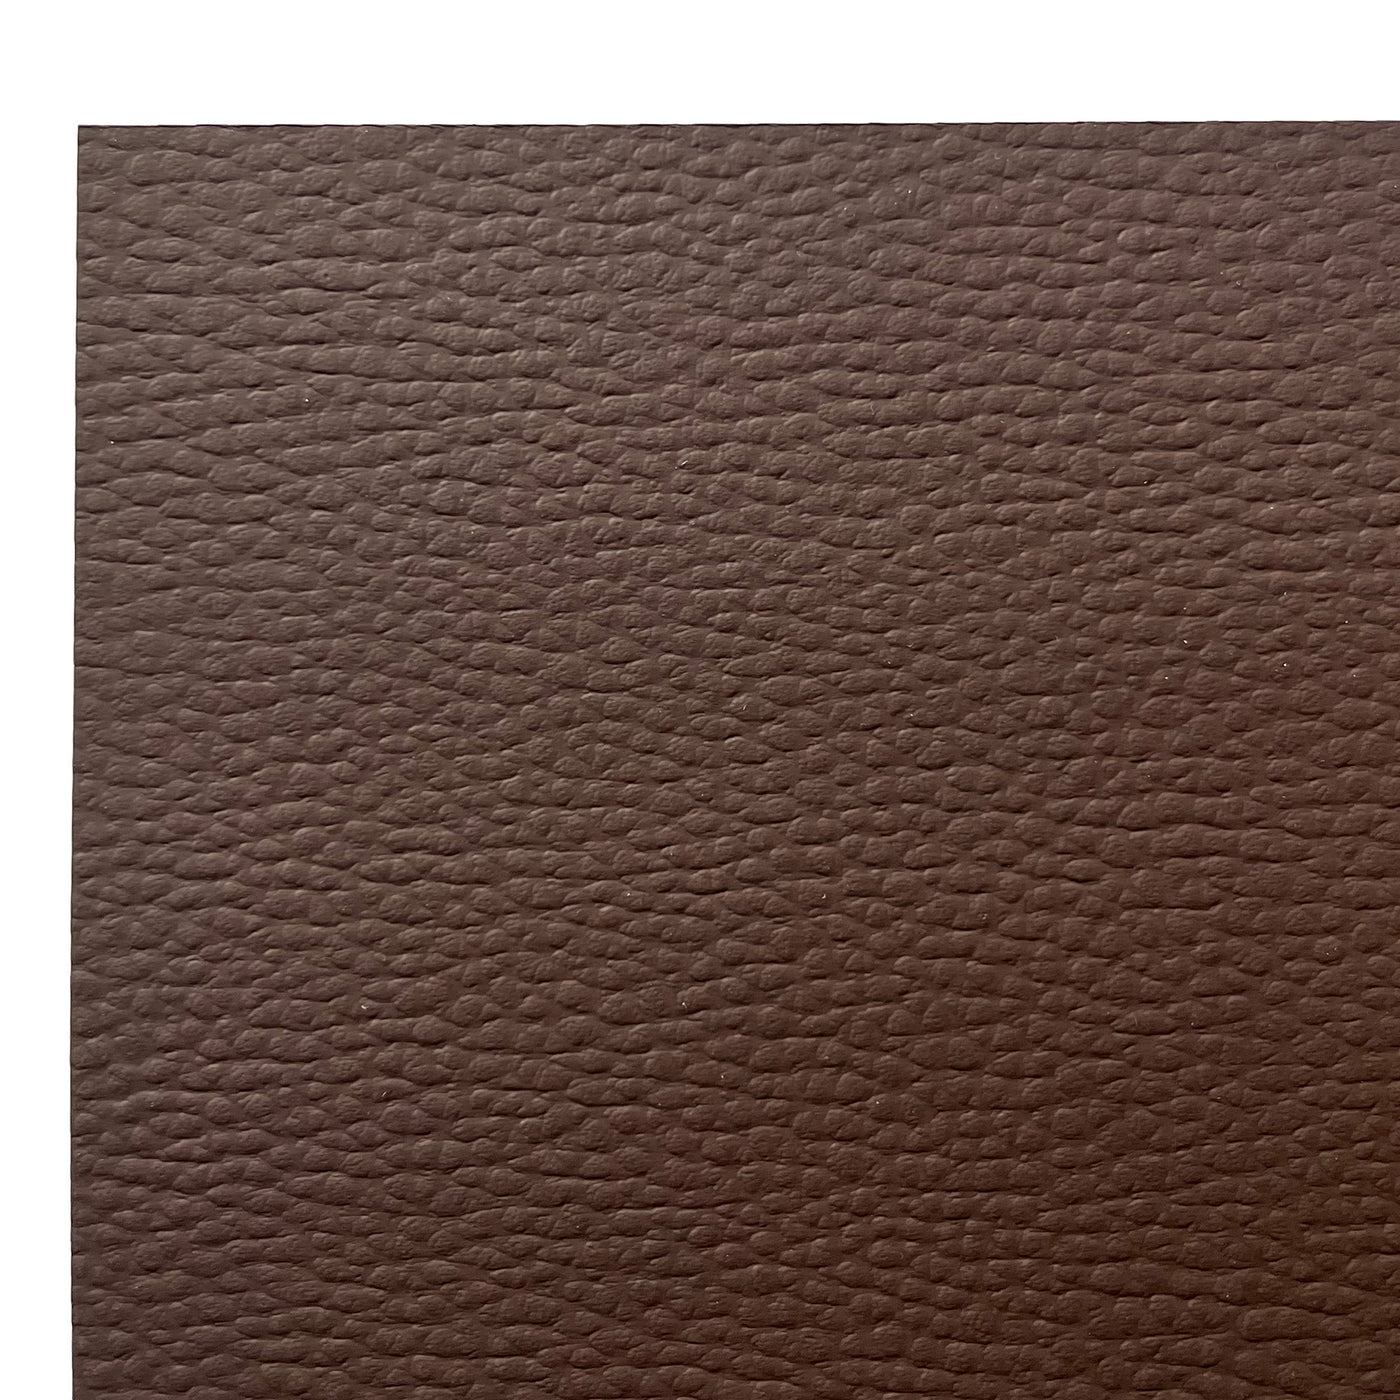 CLASSIC BROWN - 12x12 Faux Leather Cardstock - Leatherlike